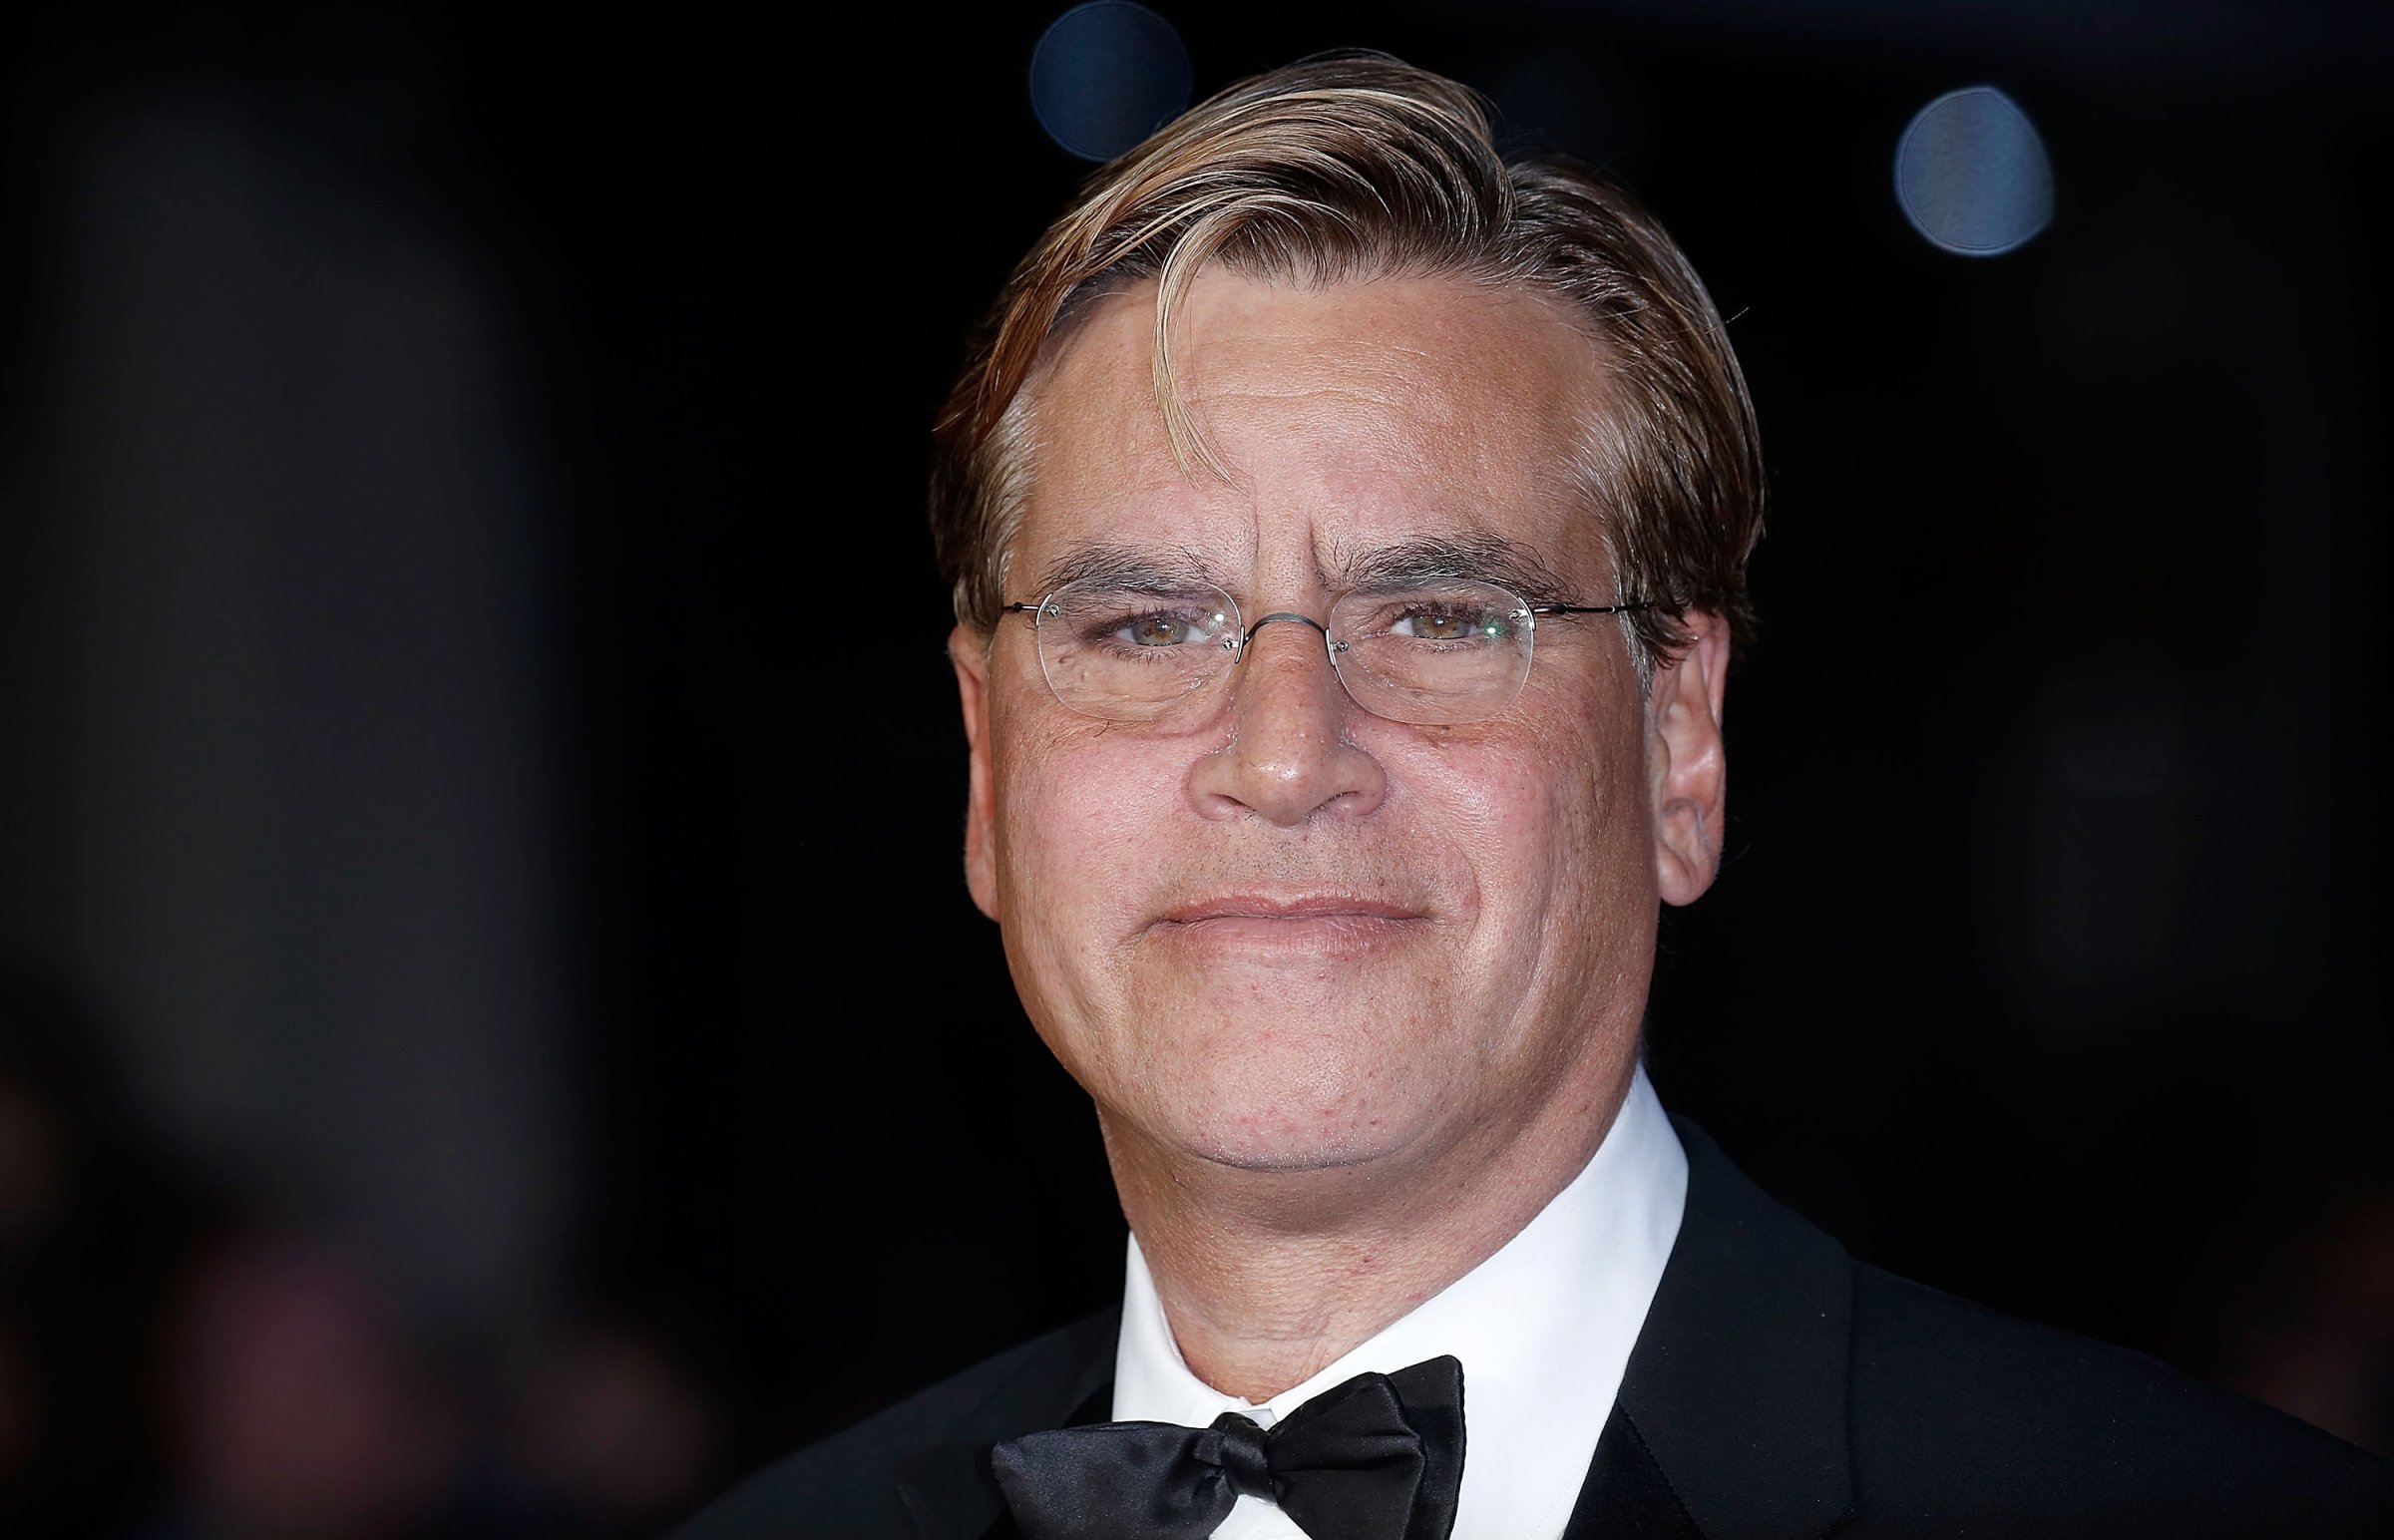 Aaron Sorkin attends the "Steve Jobs" Closing Night Gala during the BFI London Film Festival on October 18, 2015 in London, England.